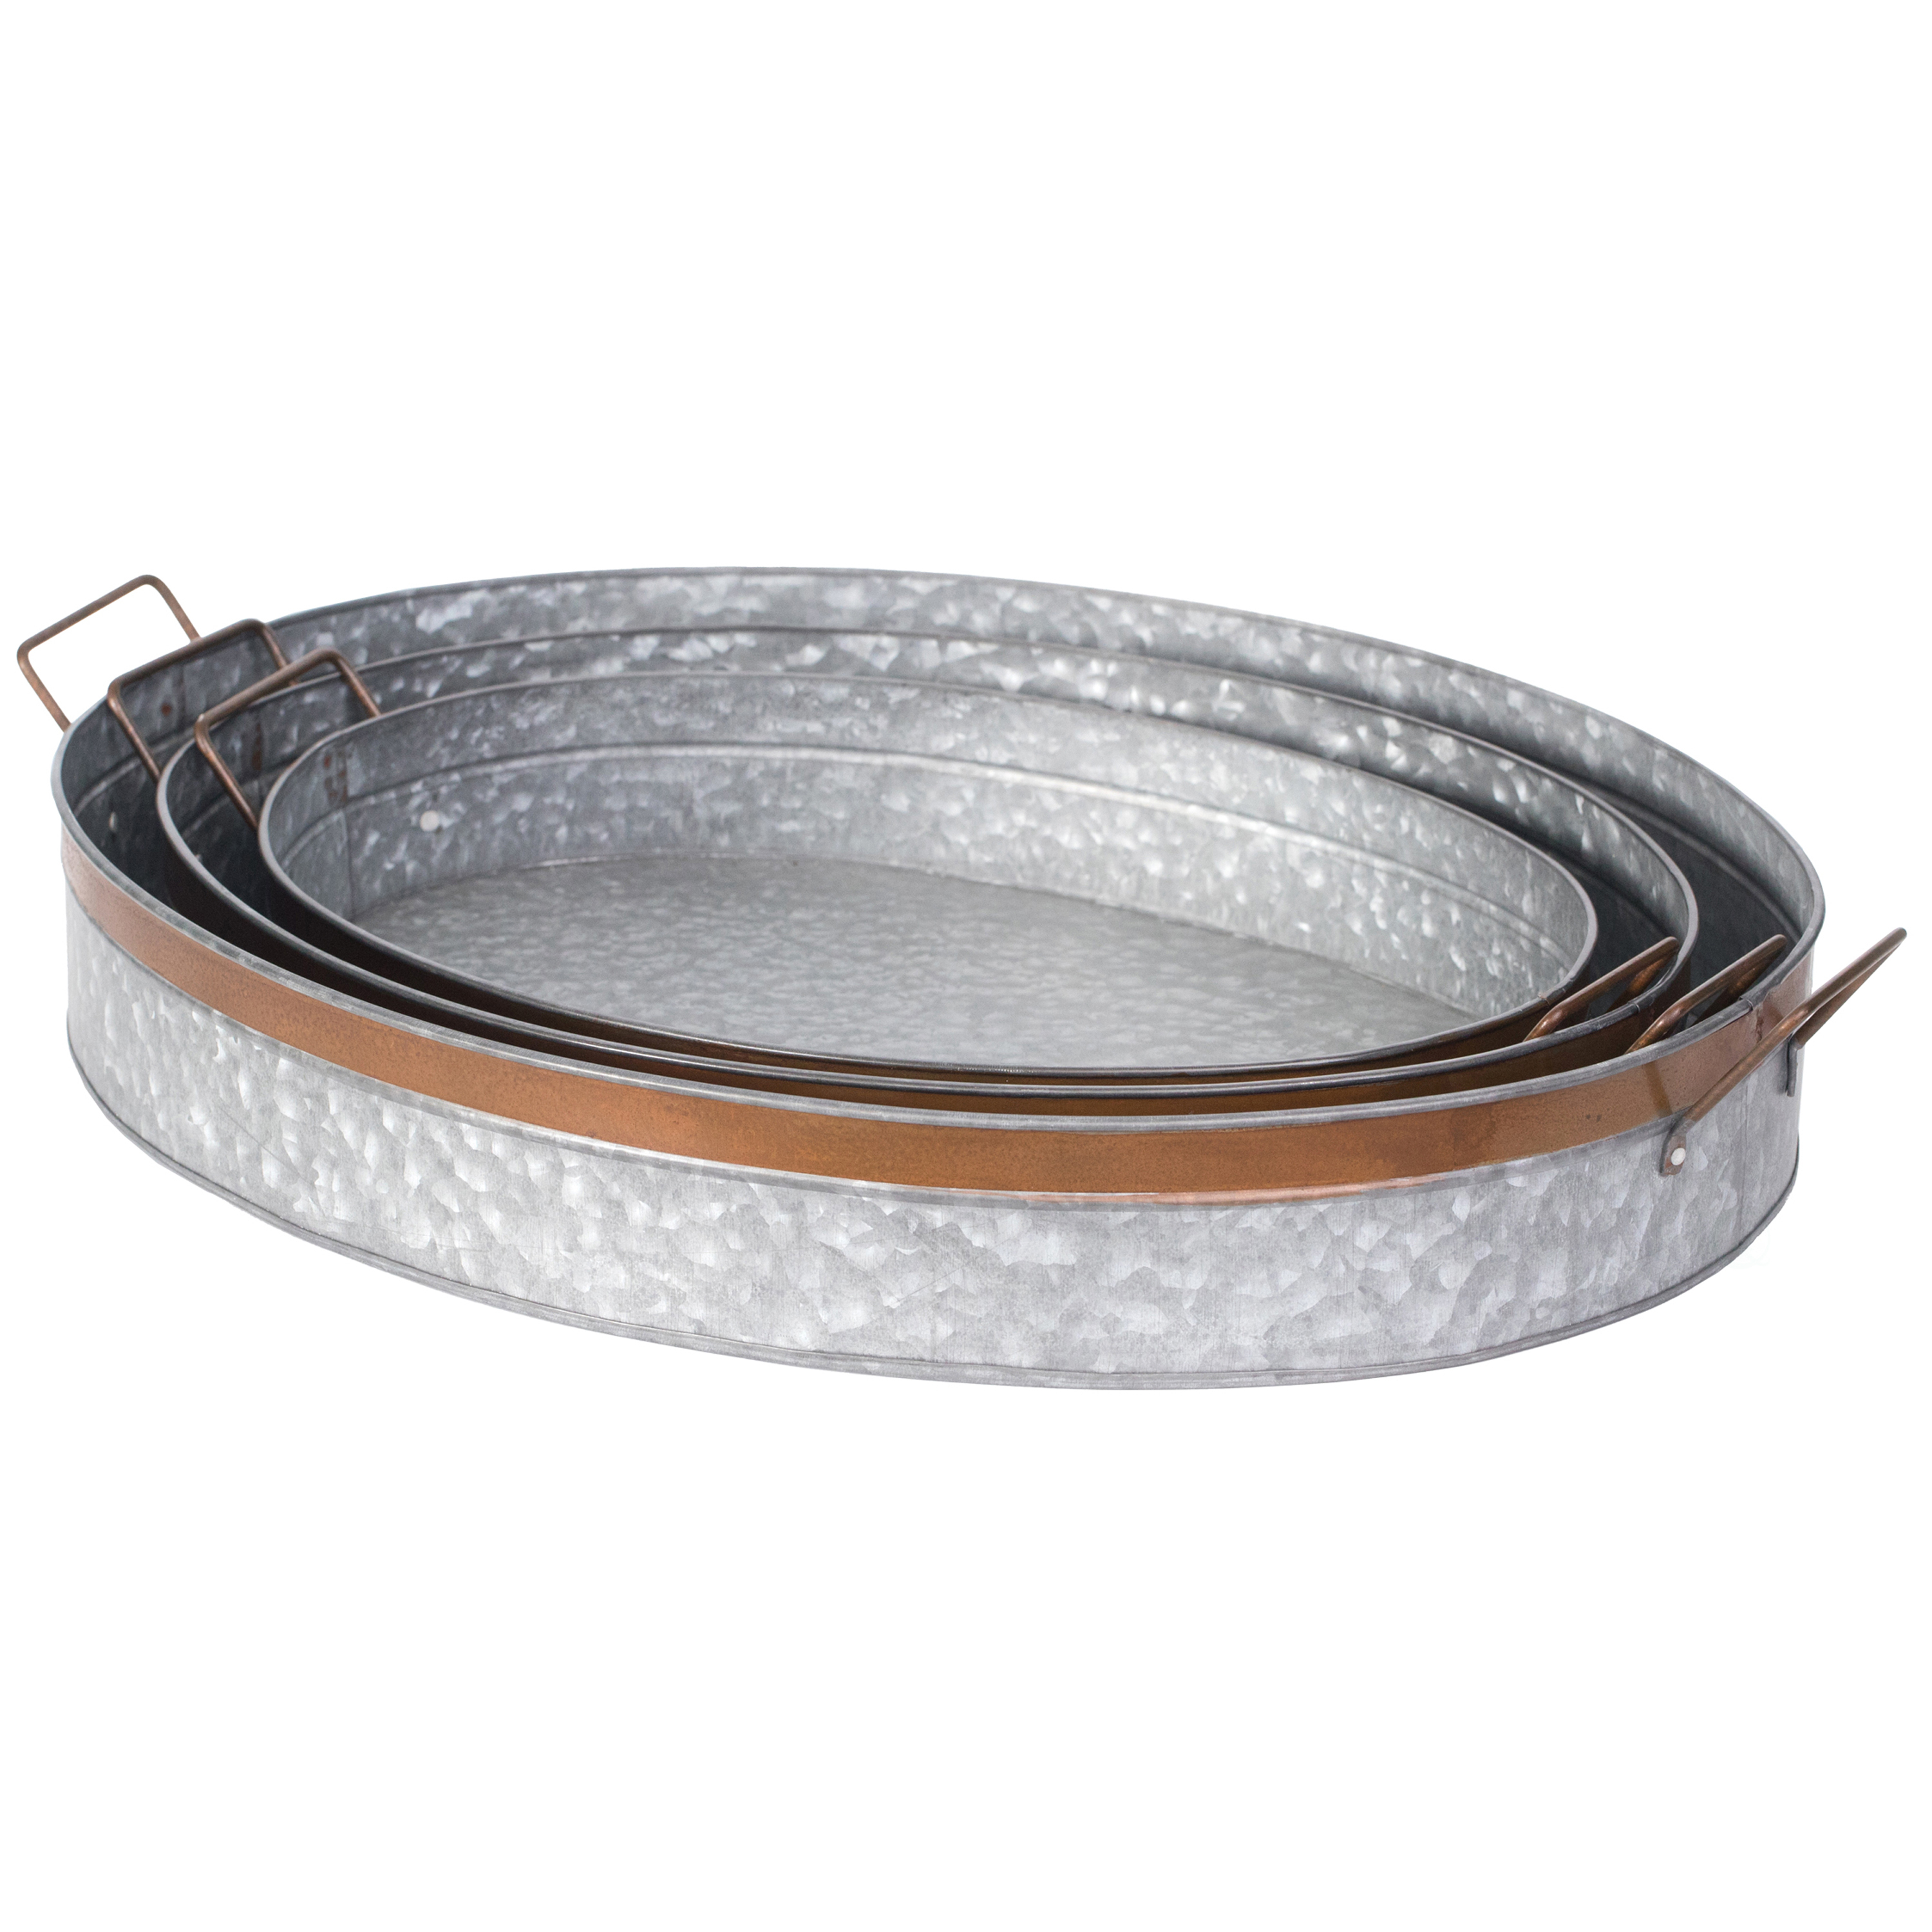 Galvanized Metal Oval Rustic Serving Tray With Handles - Medium